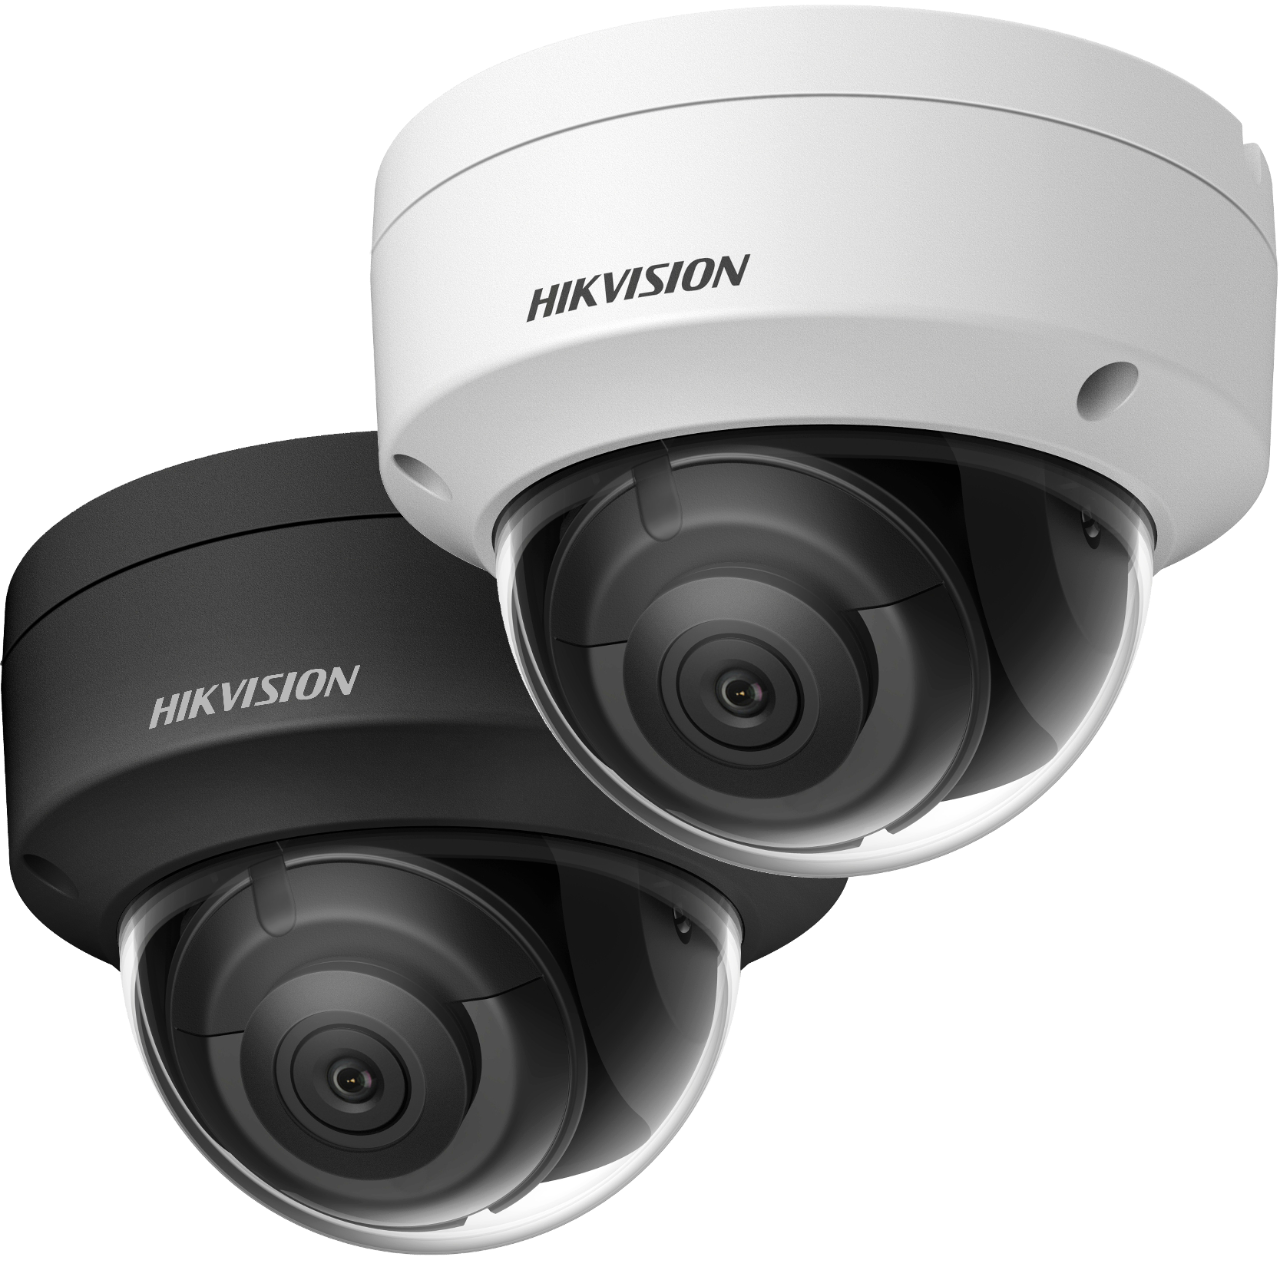 <p><span style="font-weight: bold; font-style: italic;">HIKVISION&nbsp; -&nbsp;</span><span style="color: inherit; font-family: inherit; font-size: 20px; font-weight: inherit; background-color: initial;">361.43лв.</span></p>